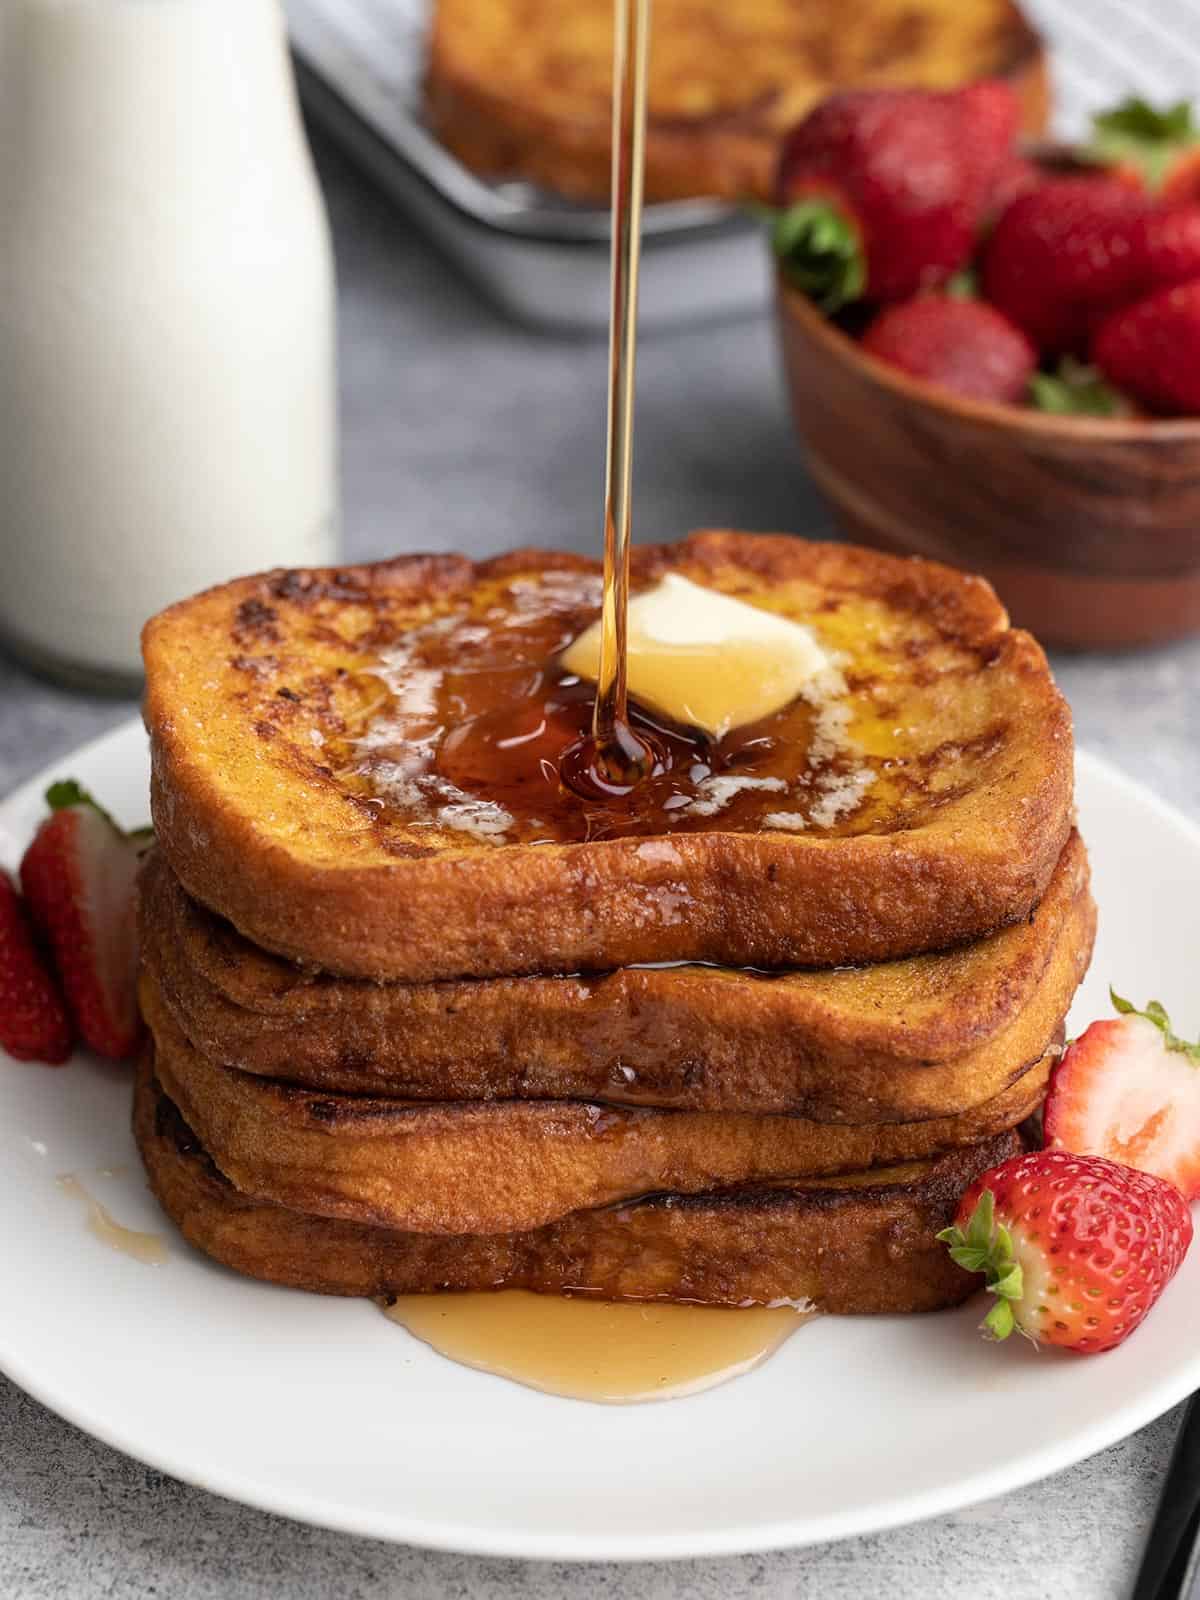 For the Best French Toast, Should You Toast the Bread First?